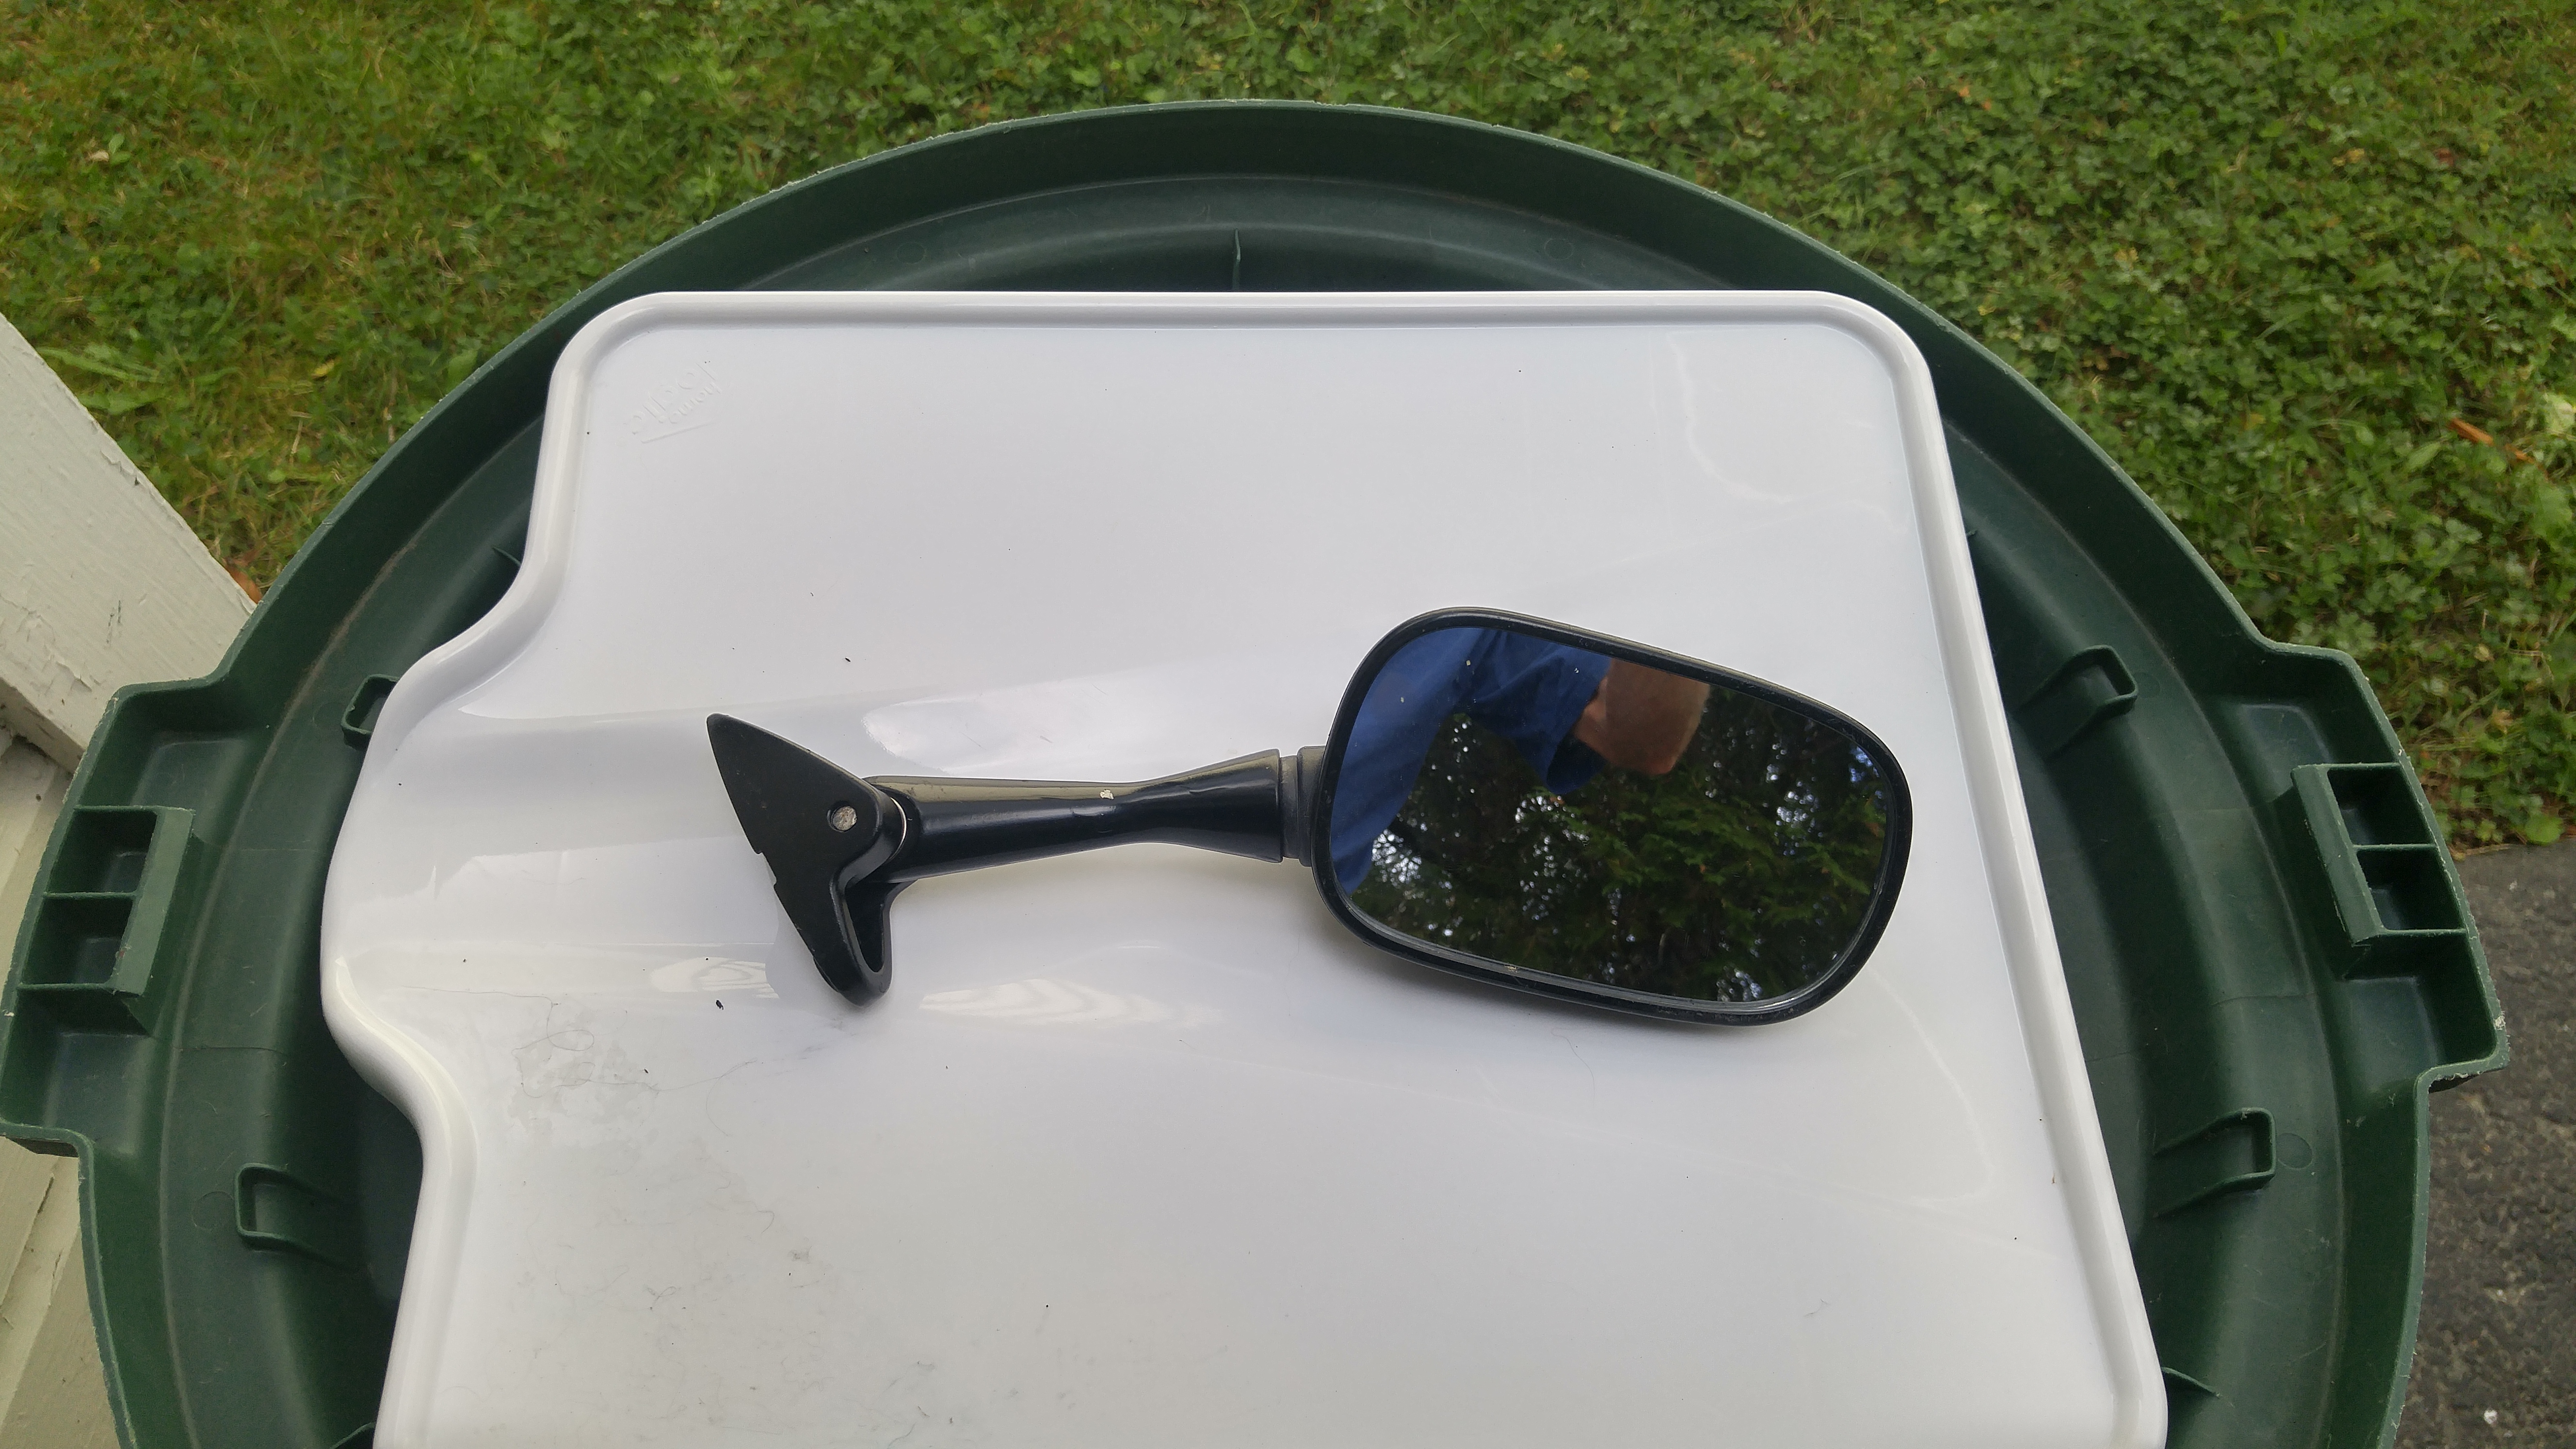 4th gen mirror options - Third and Fourth Generation VFR's - VFRDiscussion 3rd Gen With 4th Gen Mirrors